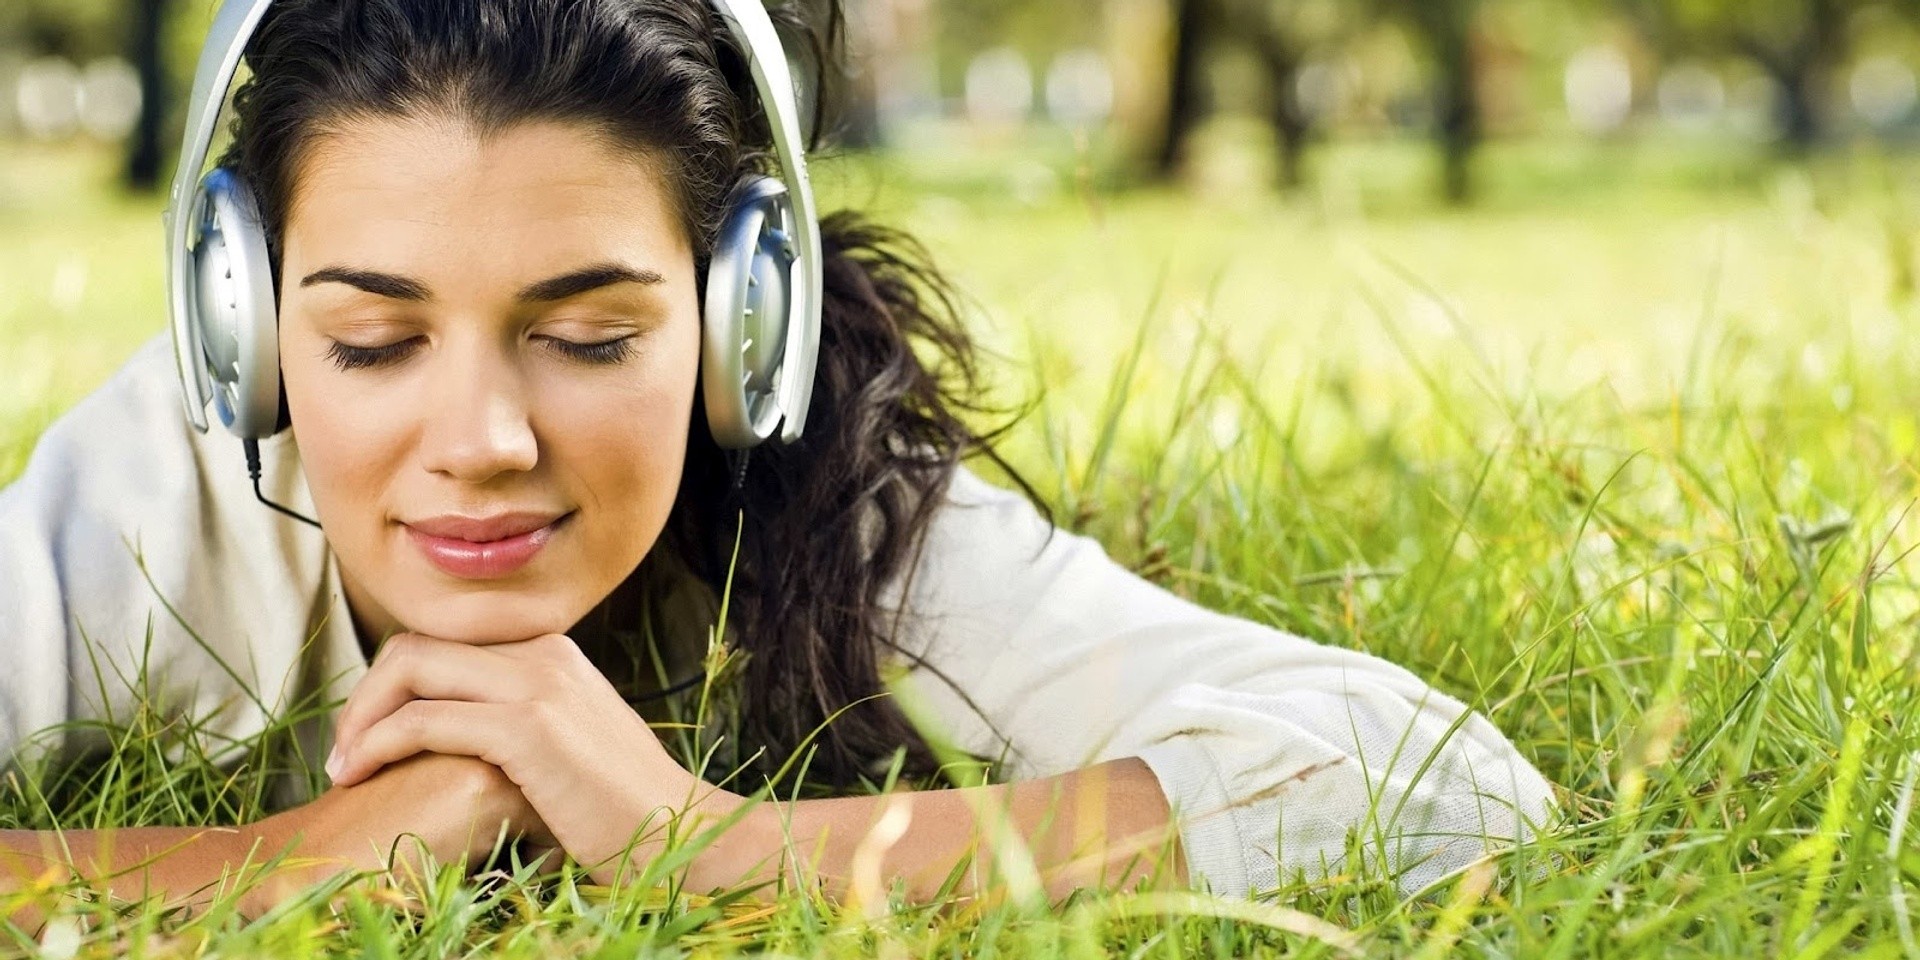 If you get goosebumps listening to music, a study shows you may be special